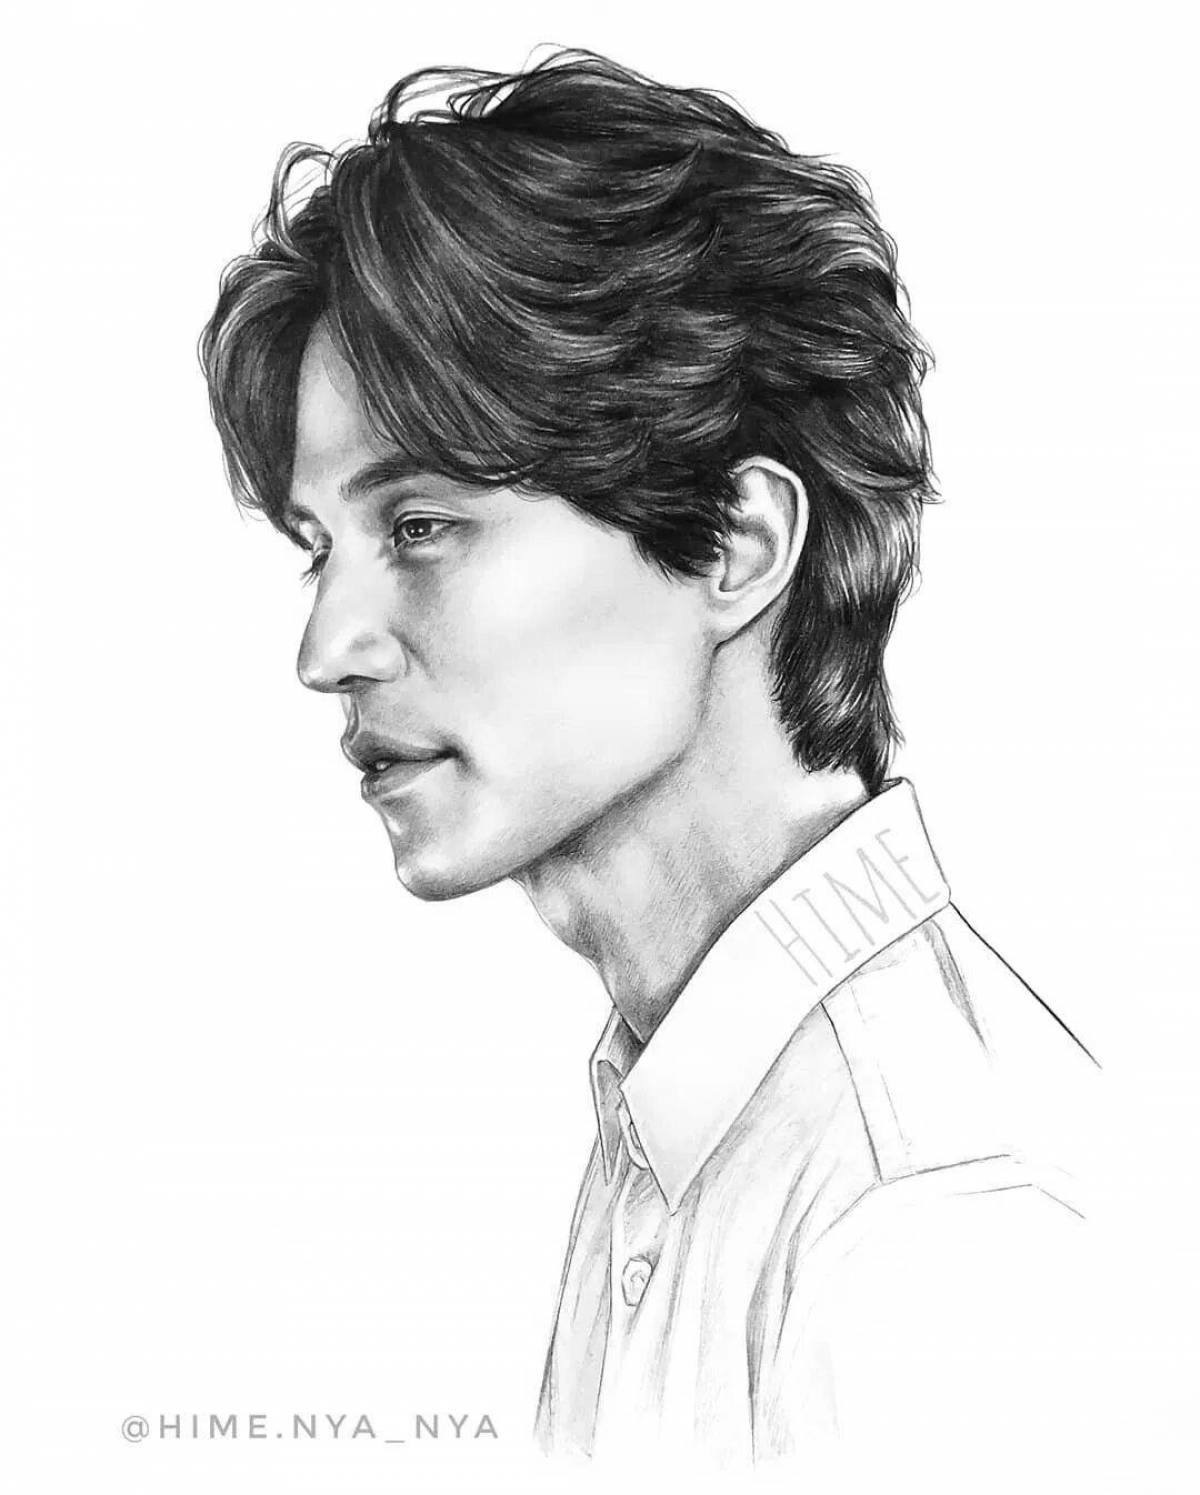 Lee dong-wook's animated coloring book